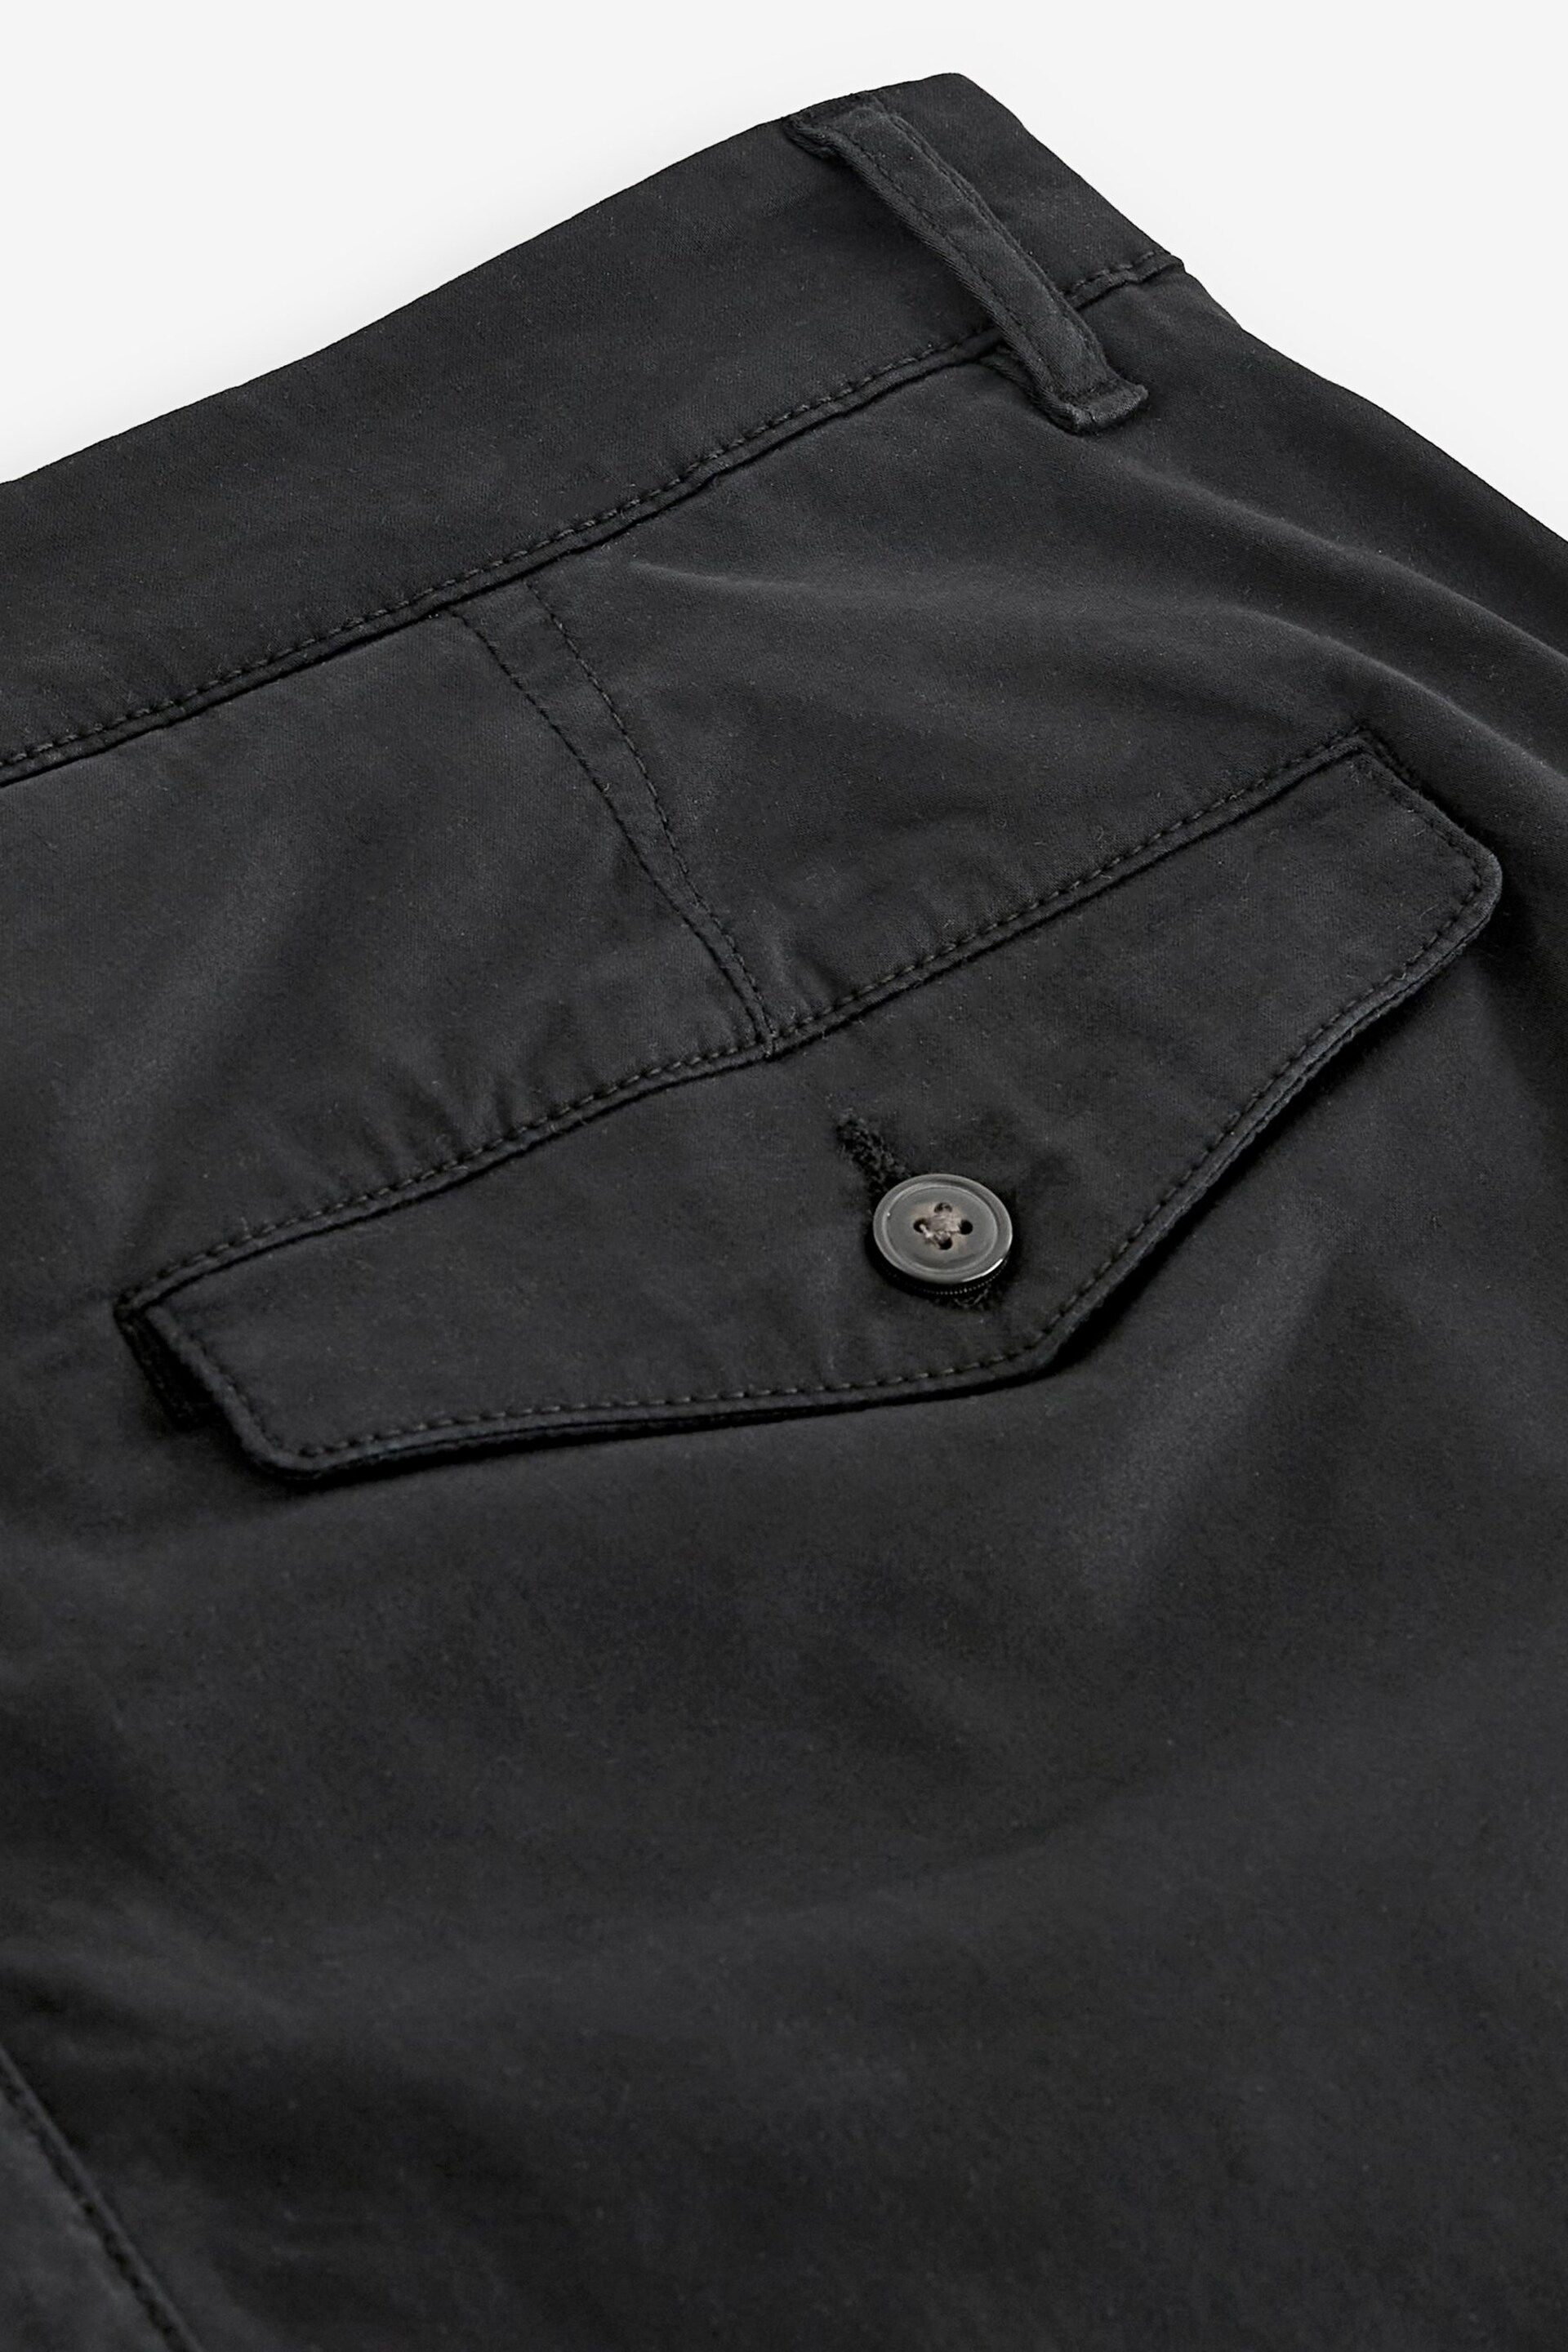 Black Slim Fit Premium Laundered Stretch Chinos Trousers - Image 10 of 10